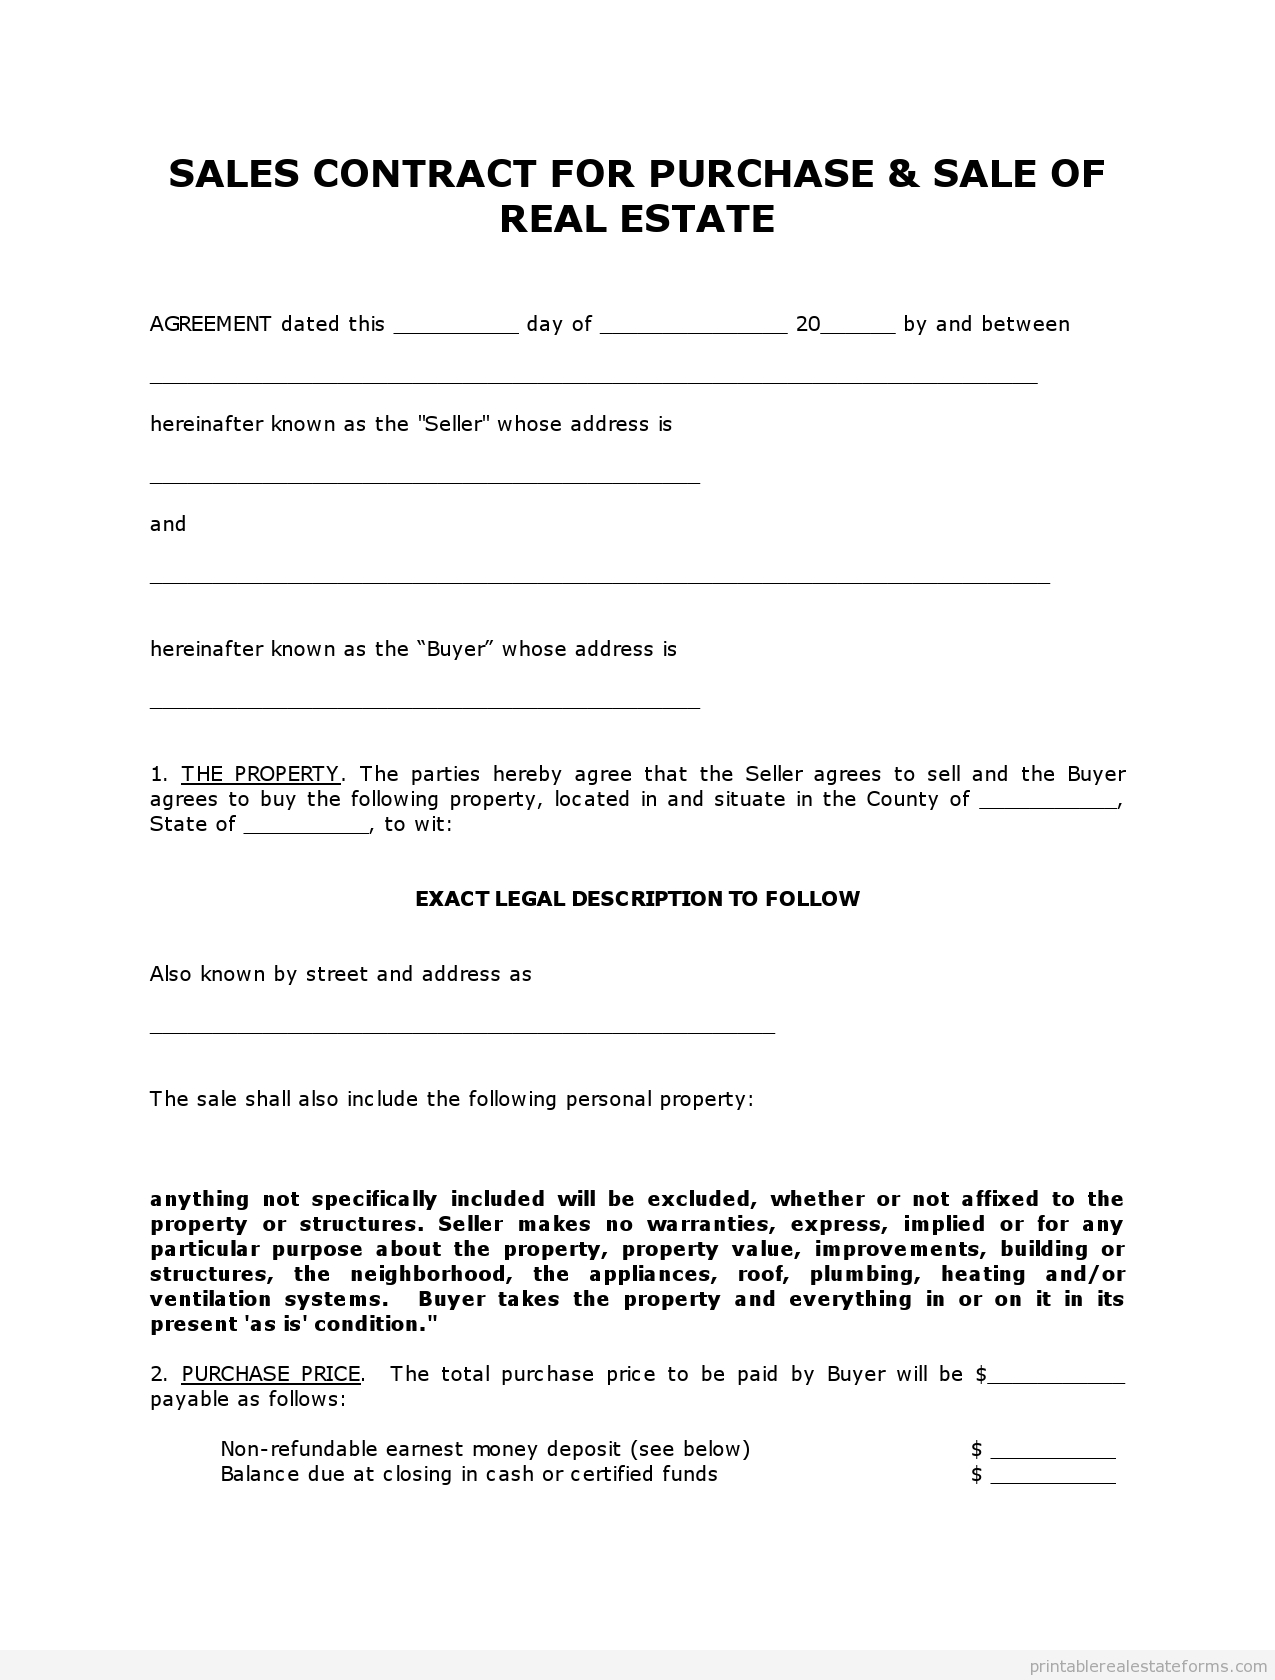 Free Printable Land Contract Forms (Word File) - Free Printable Real Estate Forms